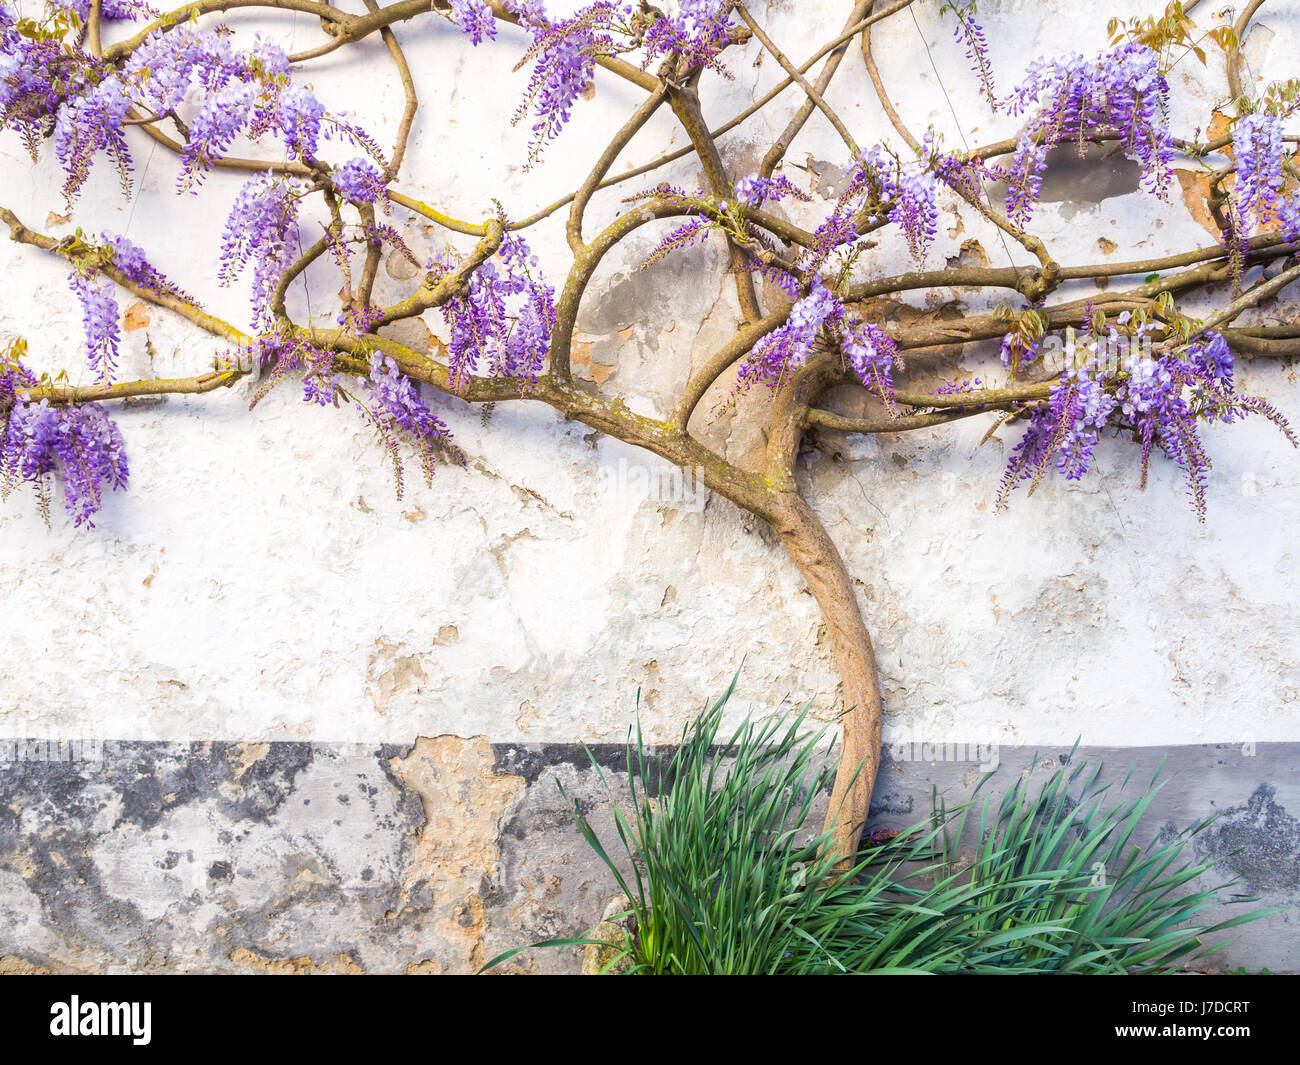 Purple wisteria plant growing in Portugal. Stock Photo